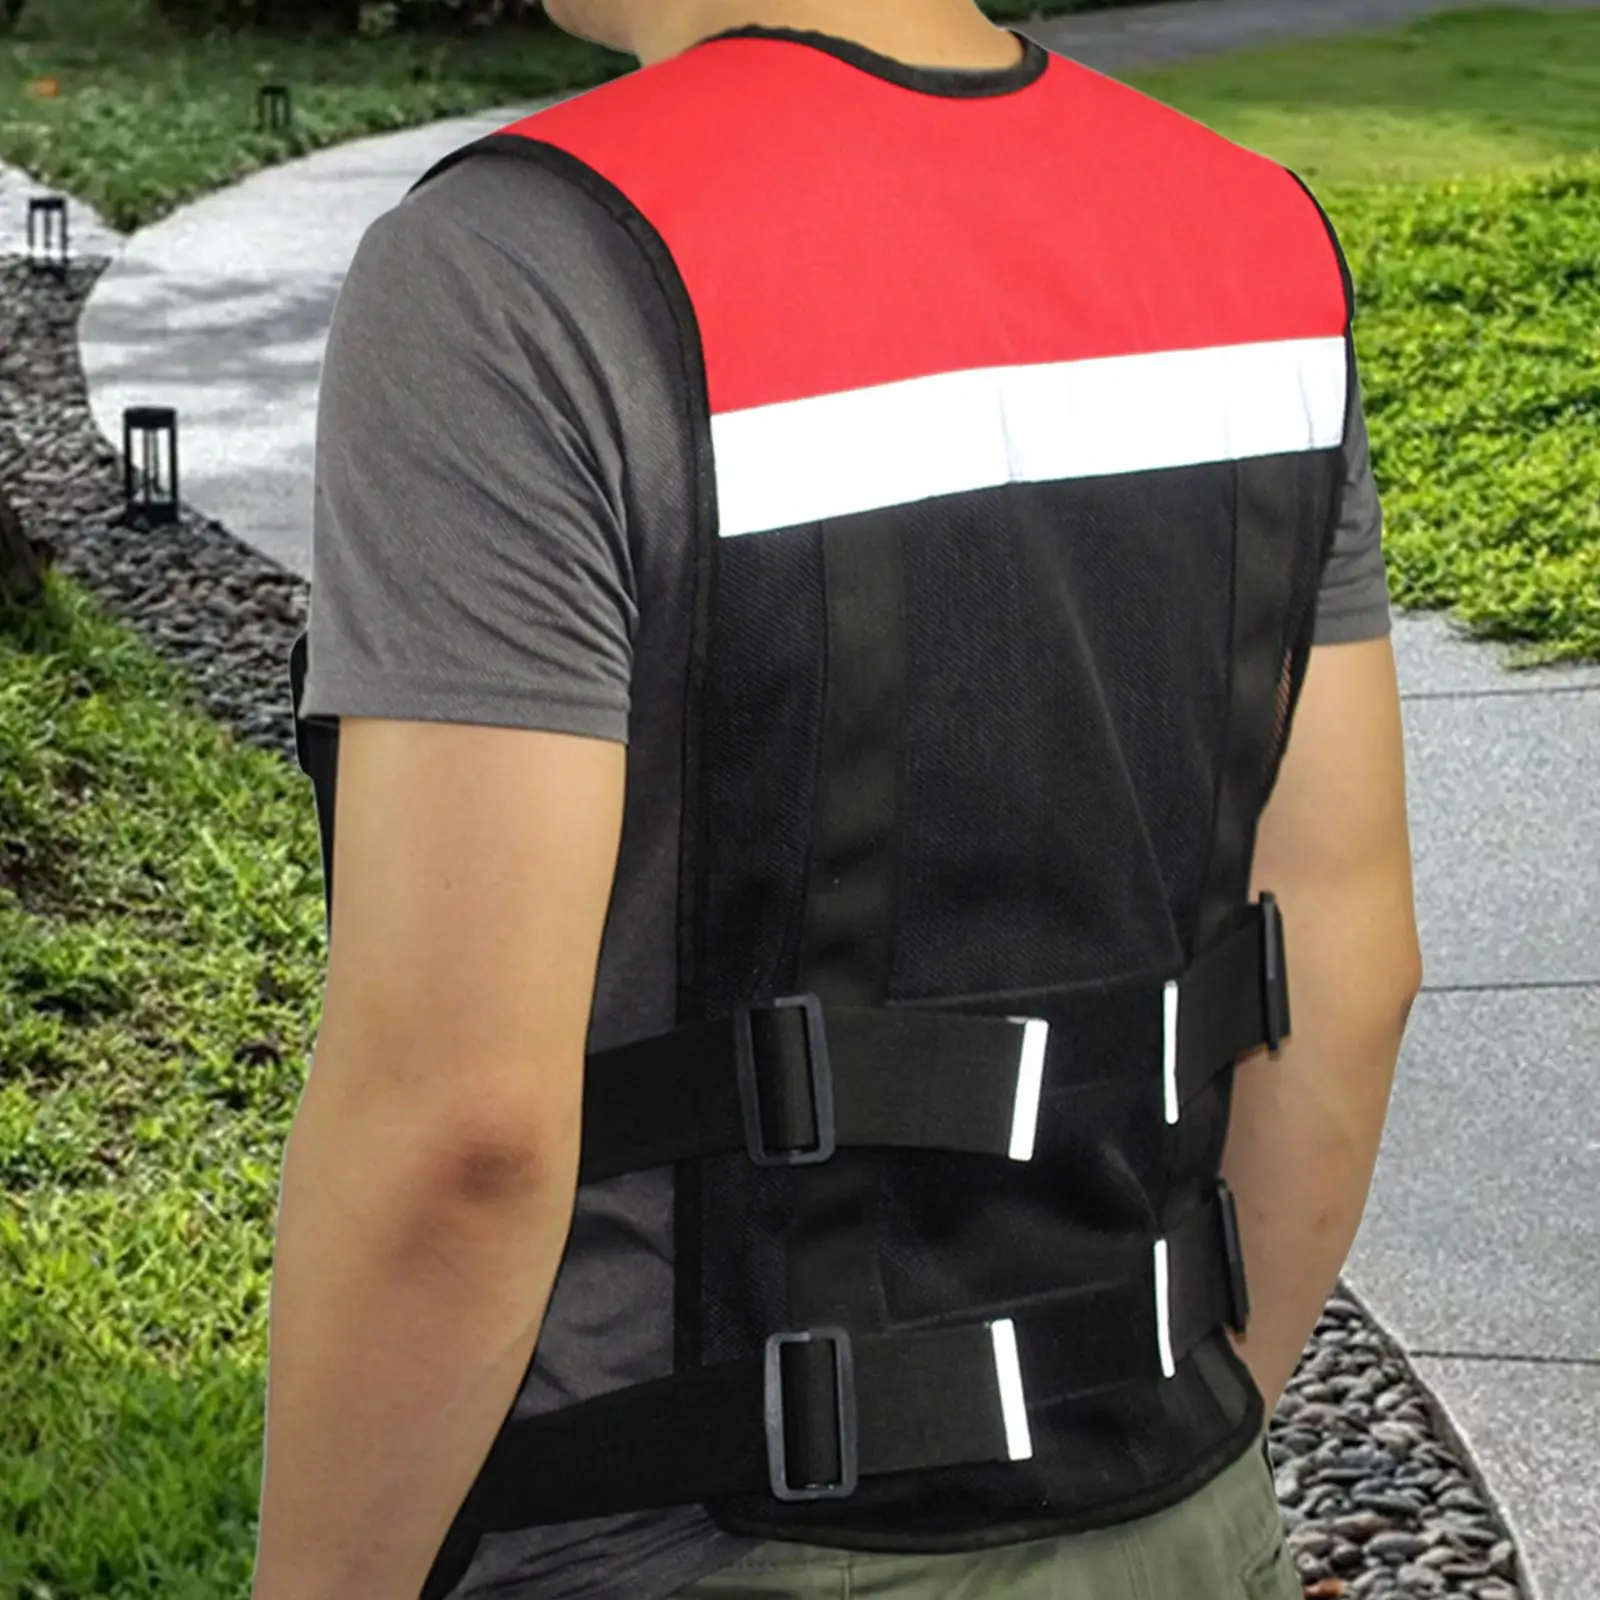 Reflective Safety Vest Professional Zipper Front for Men Women Security Vest for Night Outdoor Motorcycle Riding Traffic